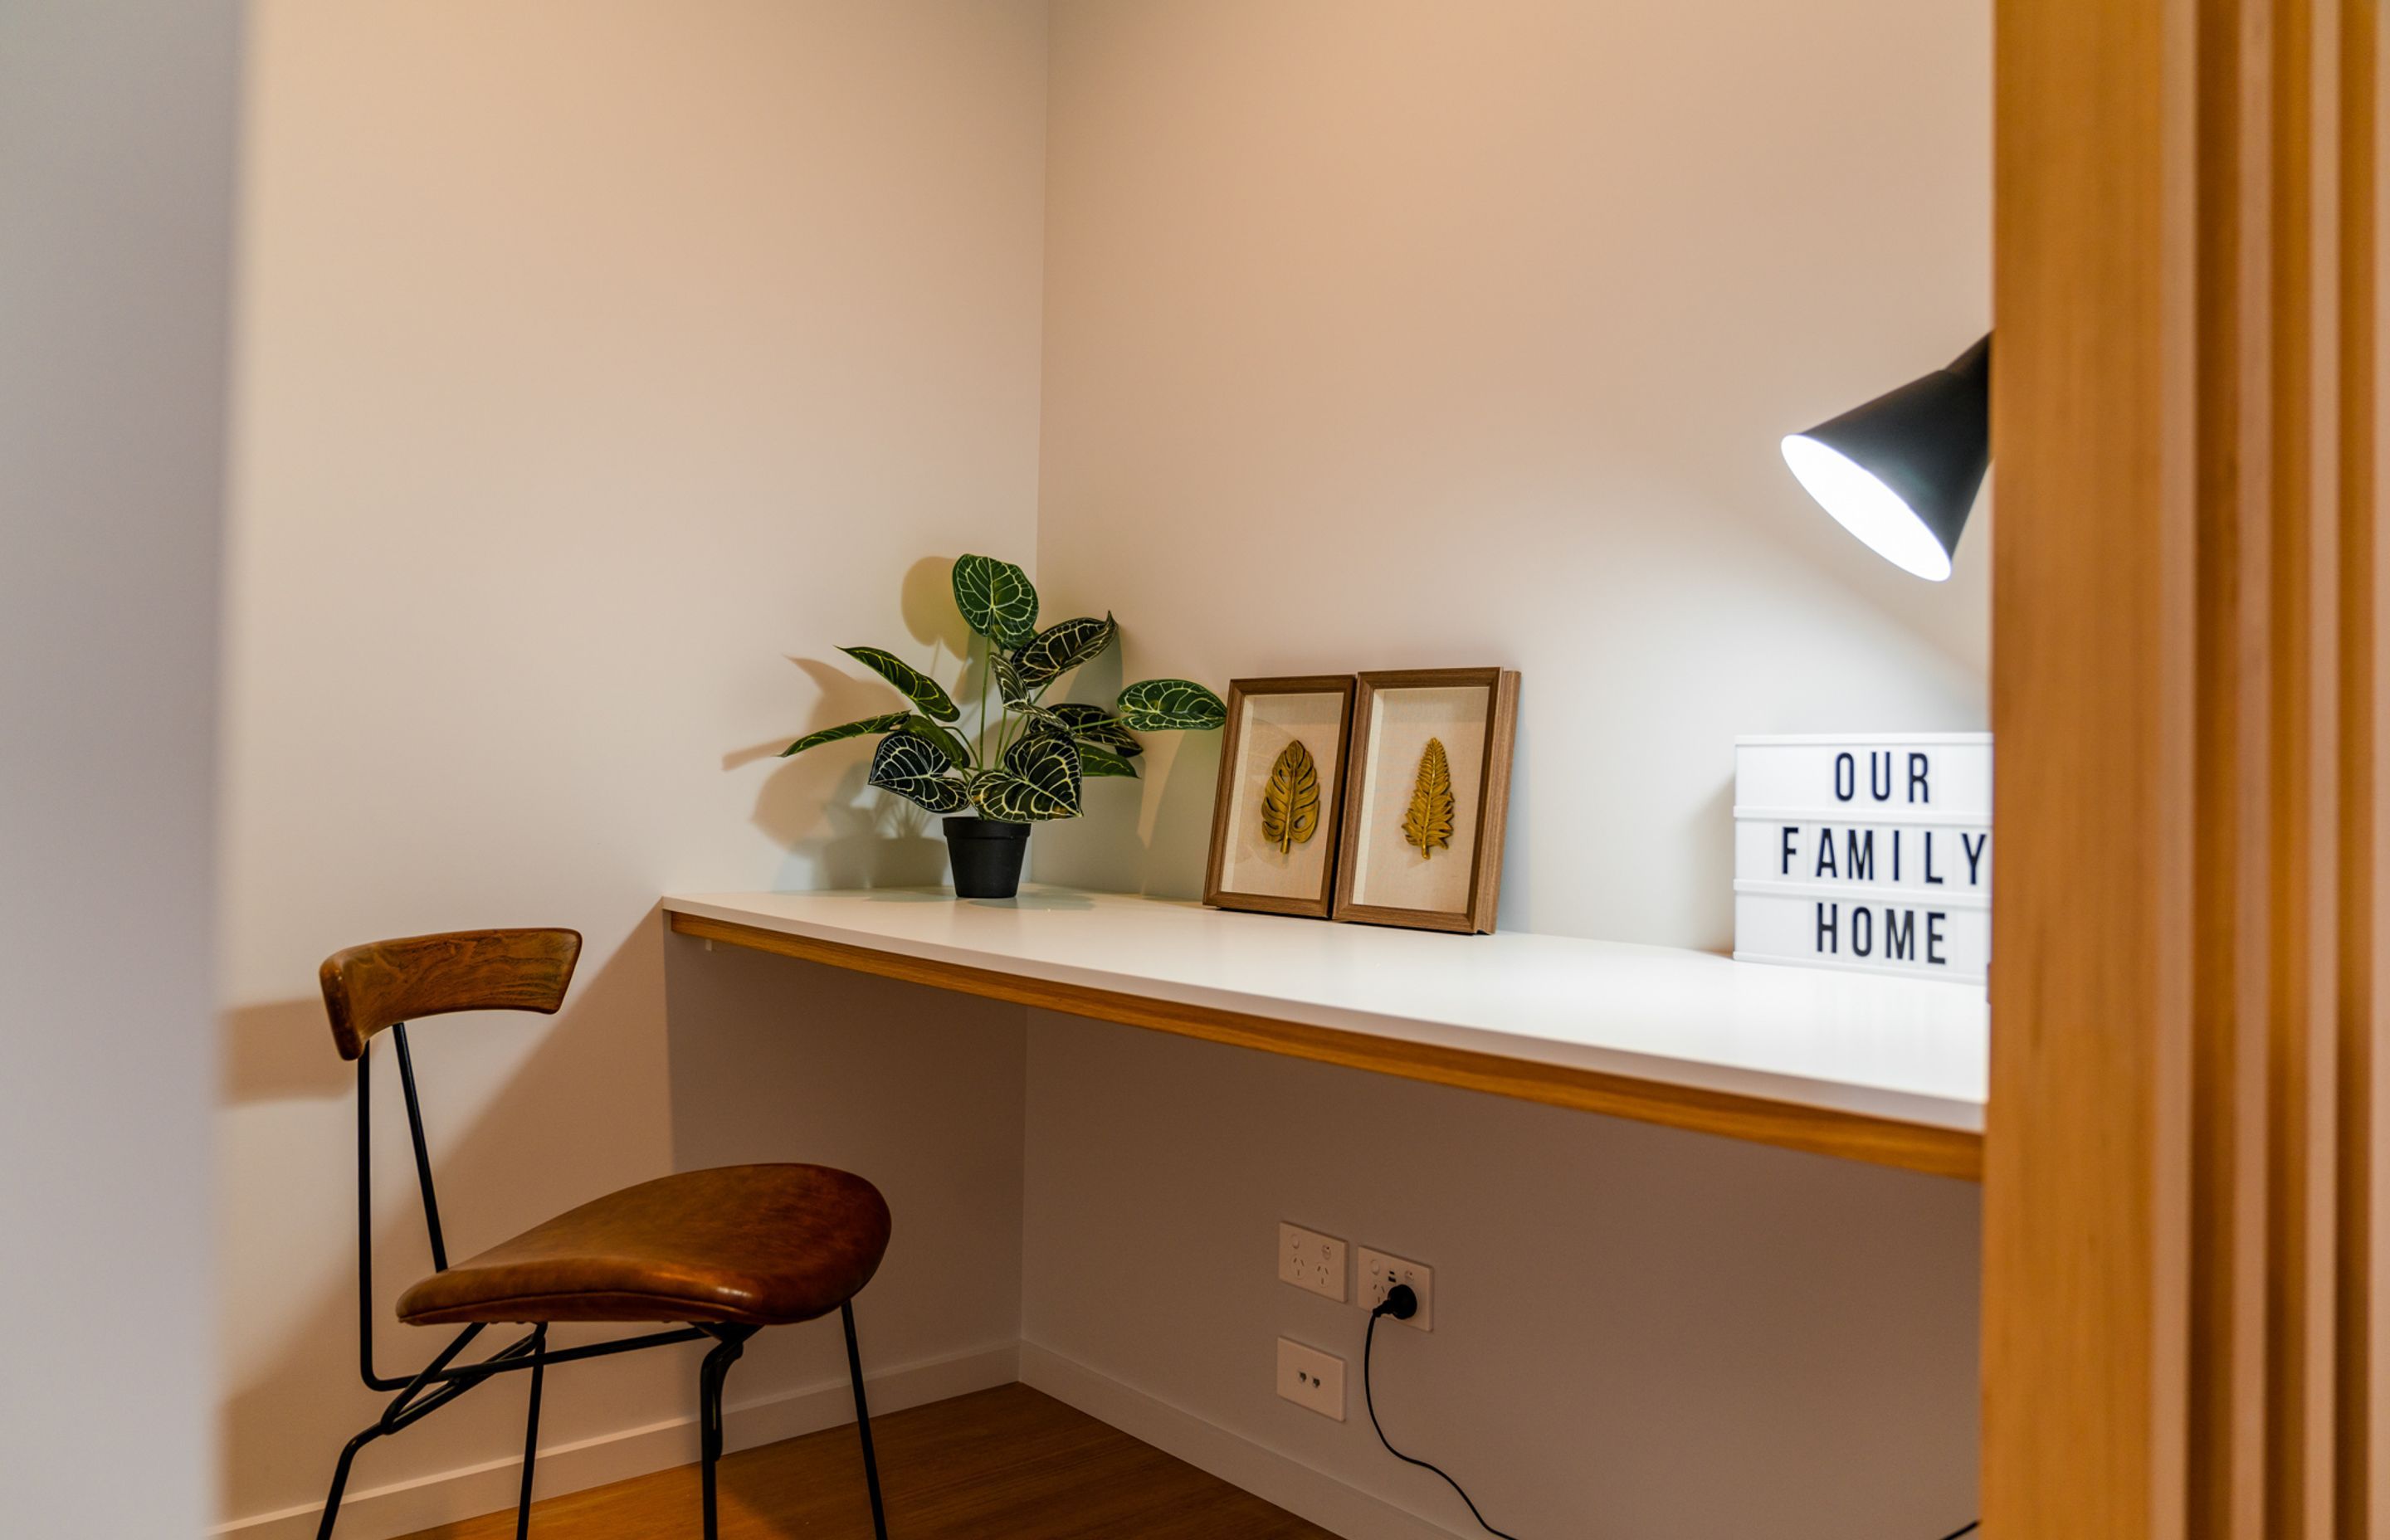 This study nook was built into a family home in the Beachgrove subdivision of Kaiapoi. Situated next to the kitchen, the nook has a clear line of sight allowing the owners of this property to keep an eye on the kids while they do their homework.